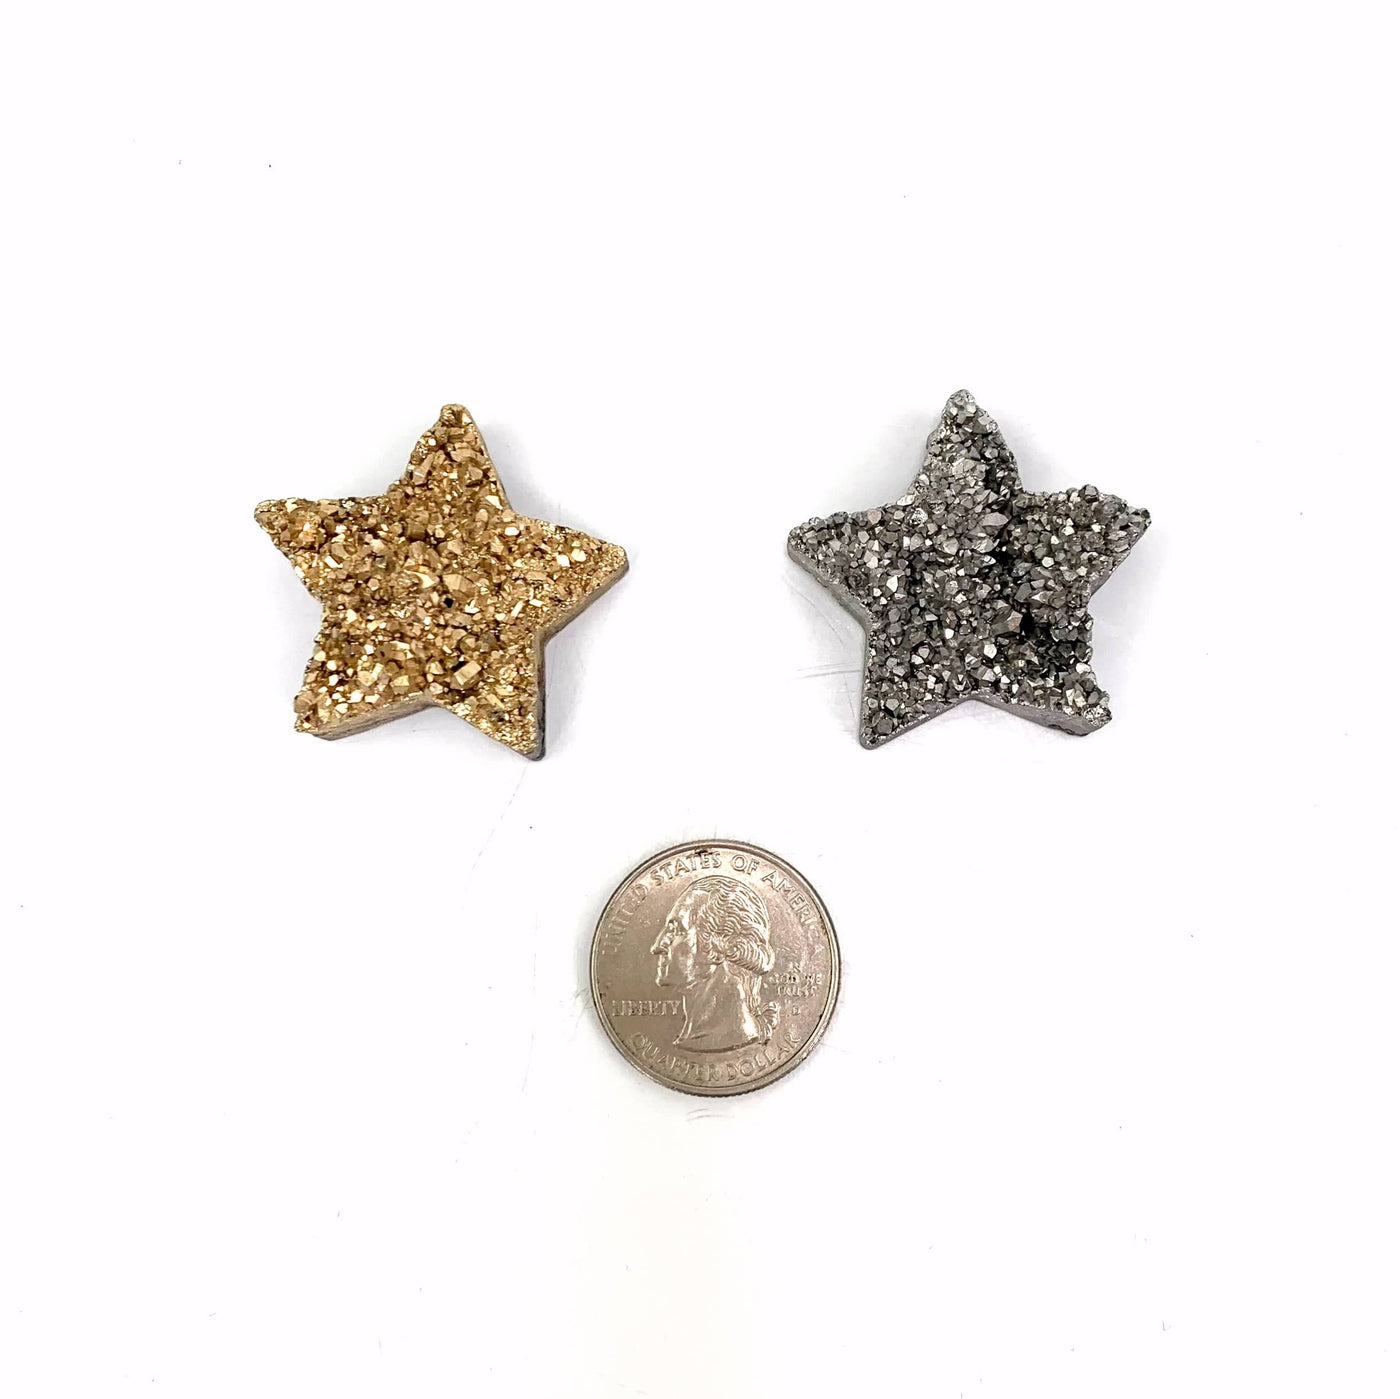 a silver and a gold star on a white background compared to a quarter stars are slightly larger than the quarter